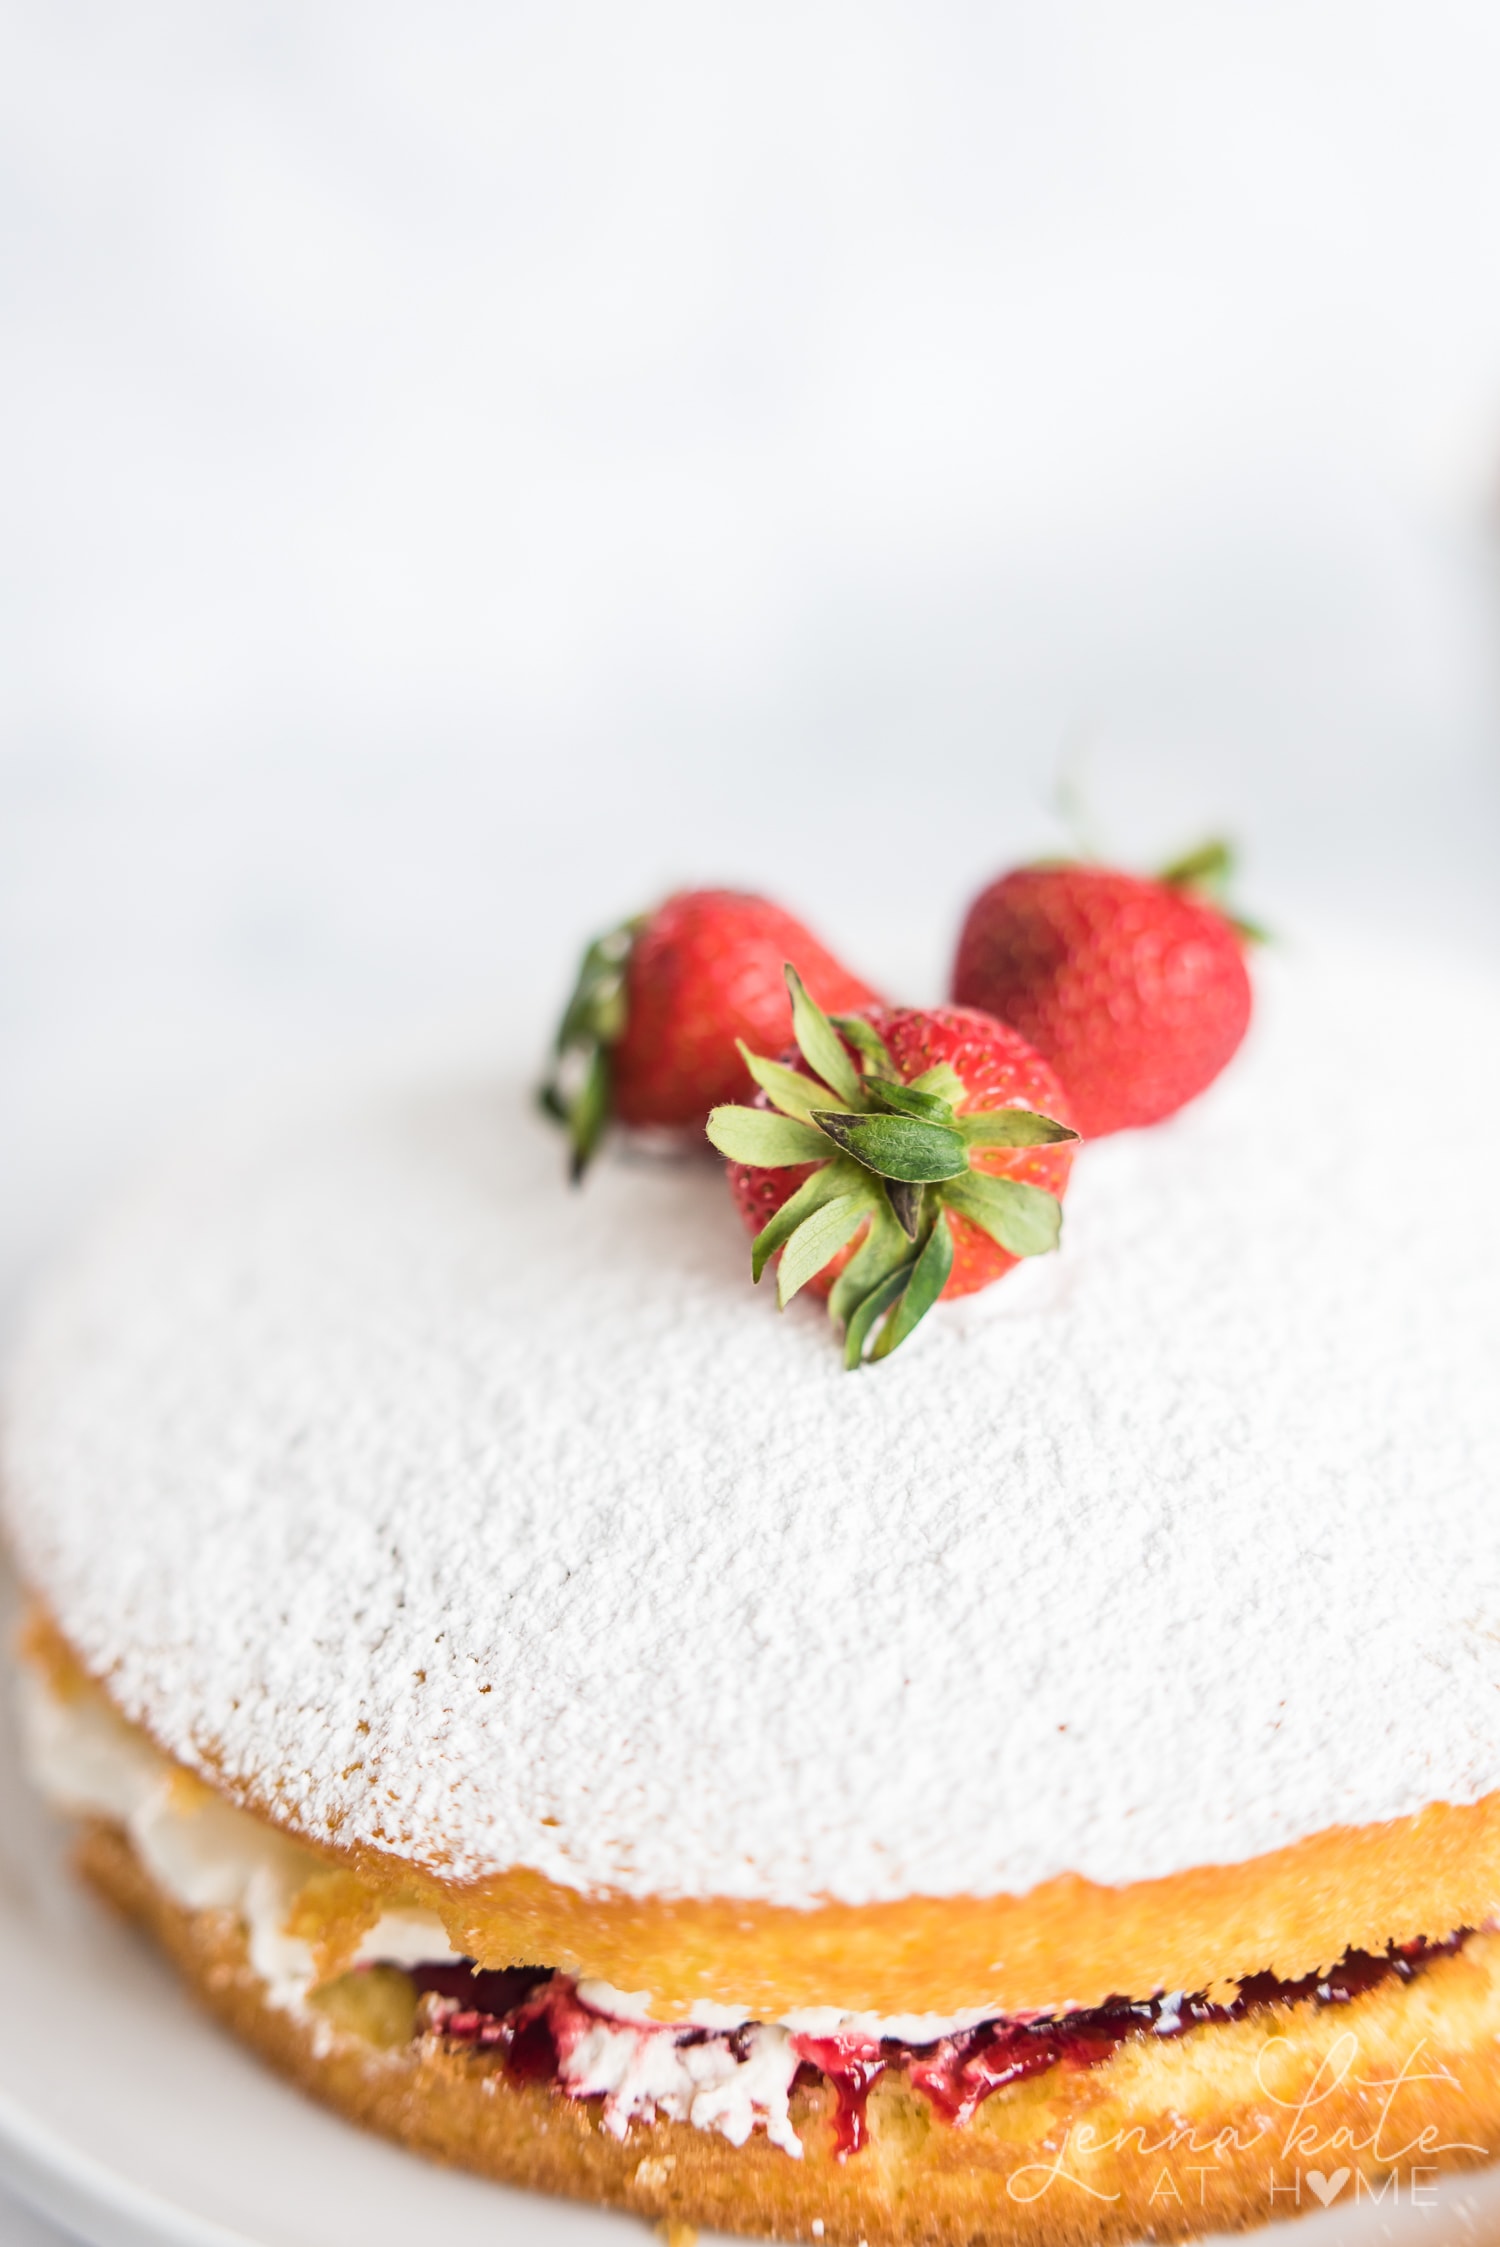 Strawberries on top of sponge cake dusted with powdered sugar